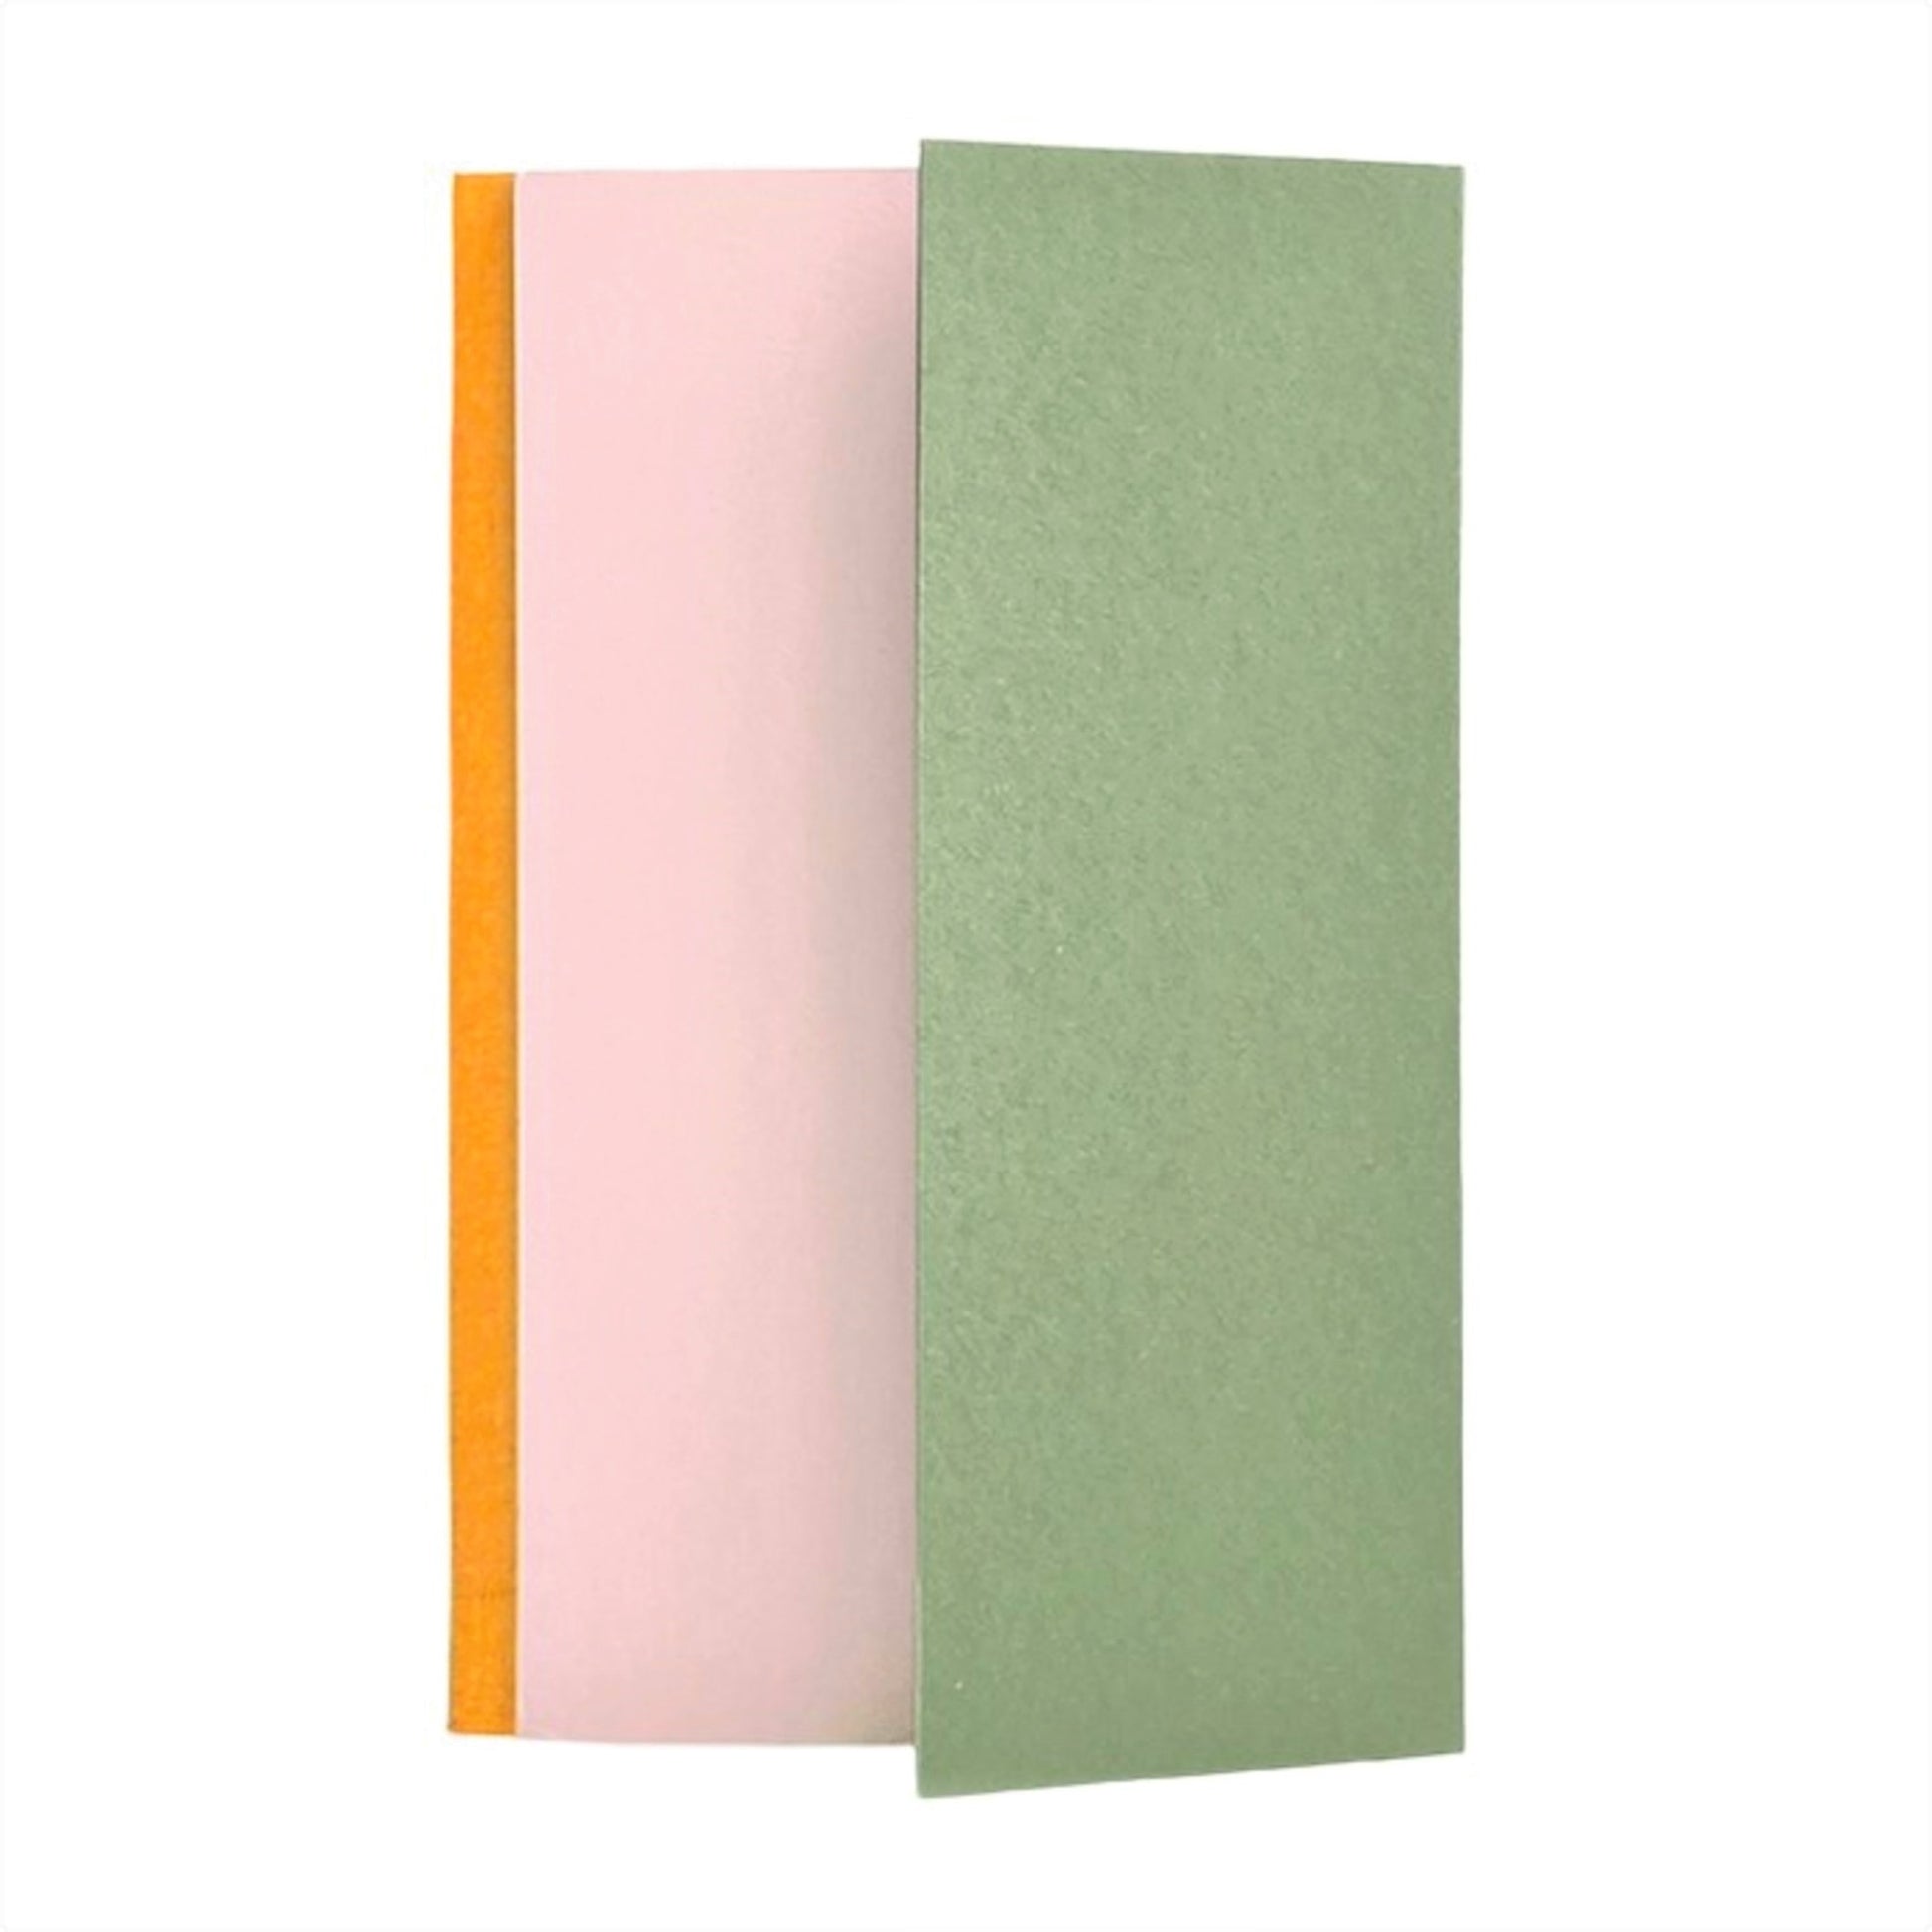 A lined notebook with striped block colours in mustard, rose and green, pictured showing the side fold that is used to protect the pages or as a place mark.